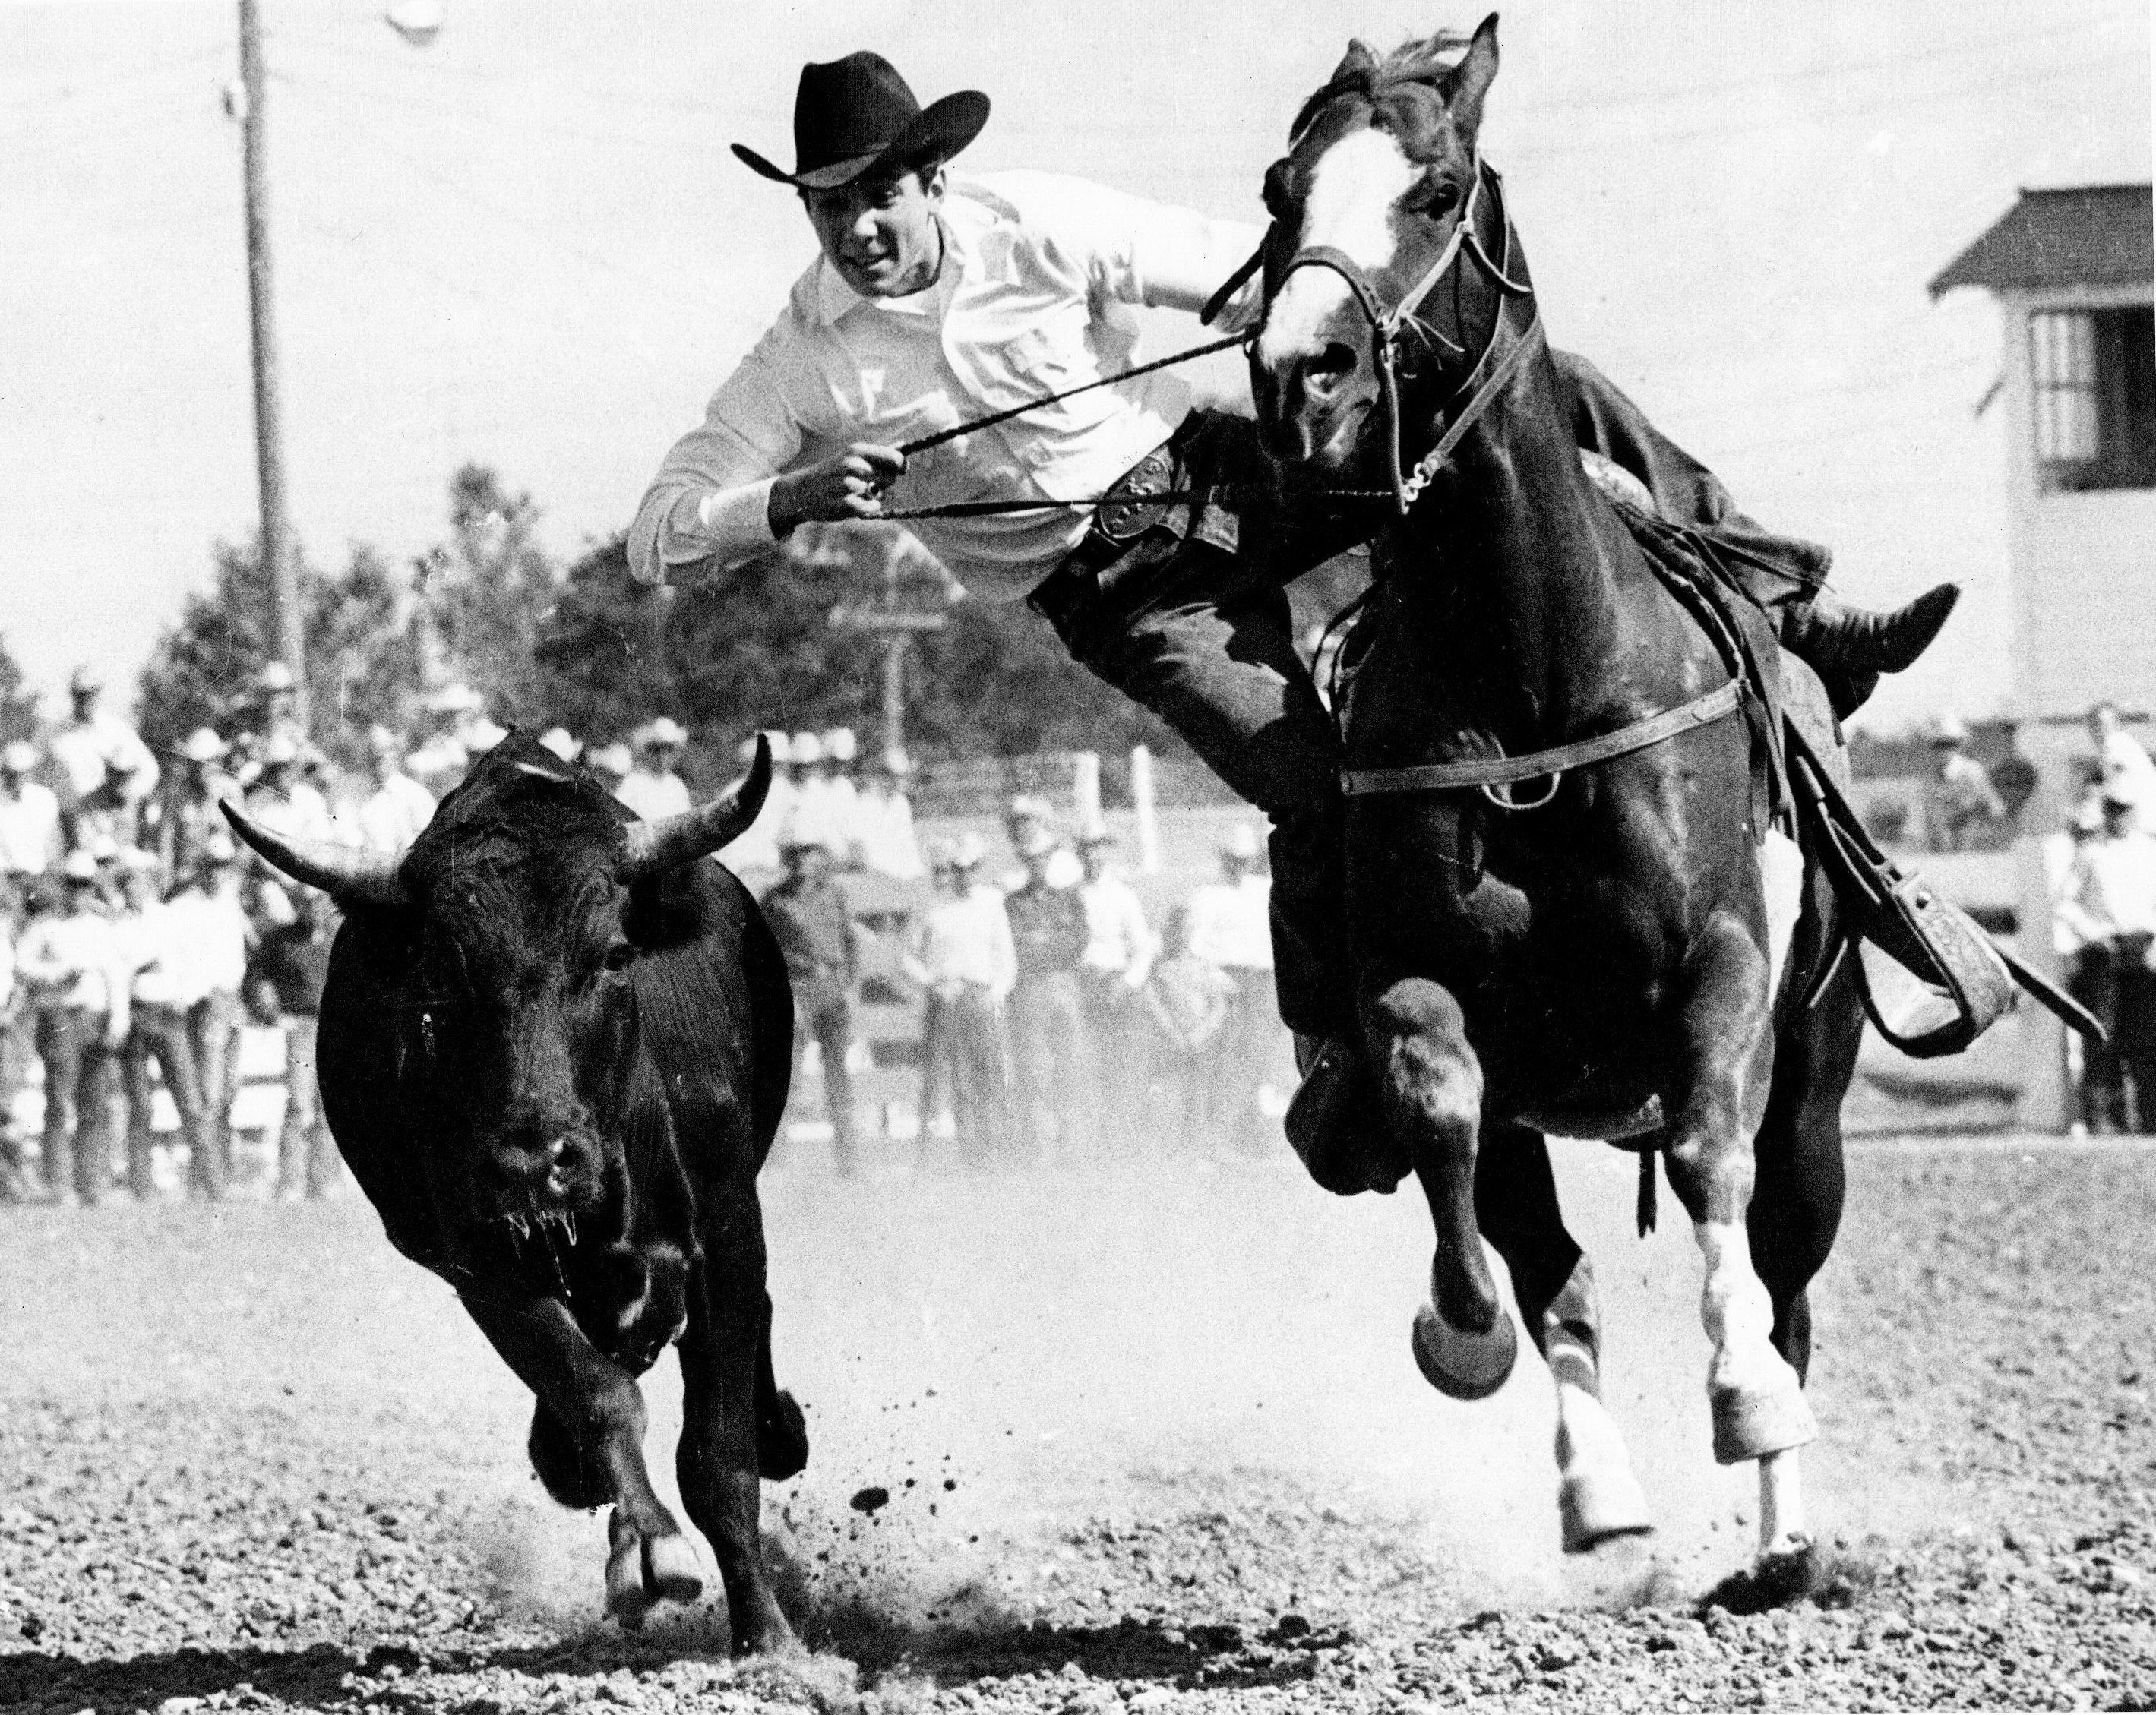 Johnny Crawford competes in steer wrestling at Cheyenne, Wyoming in 1965.